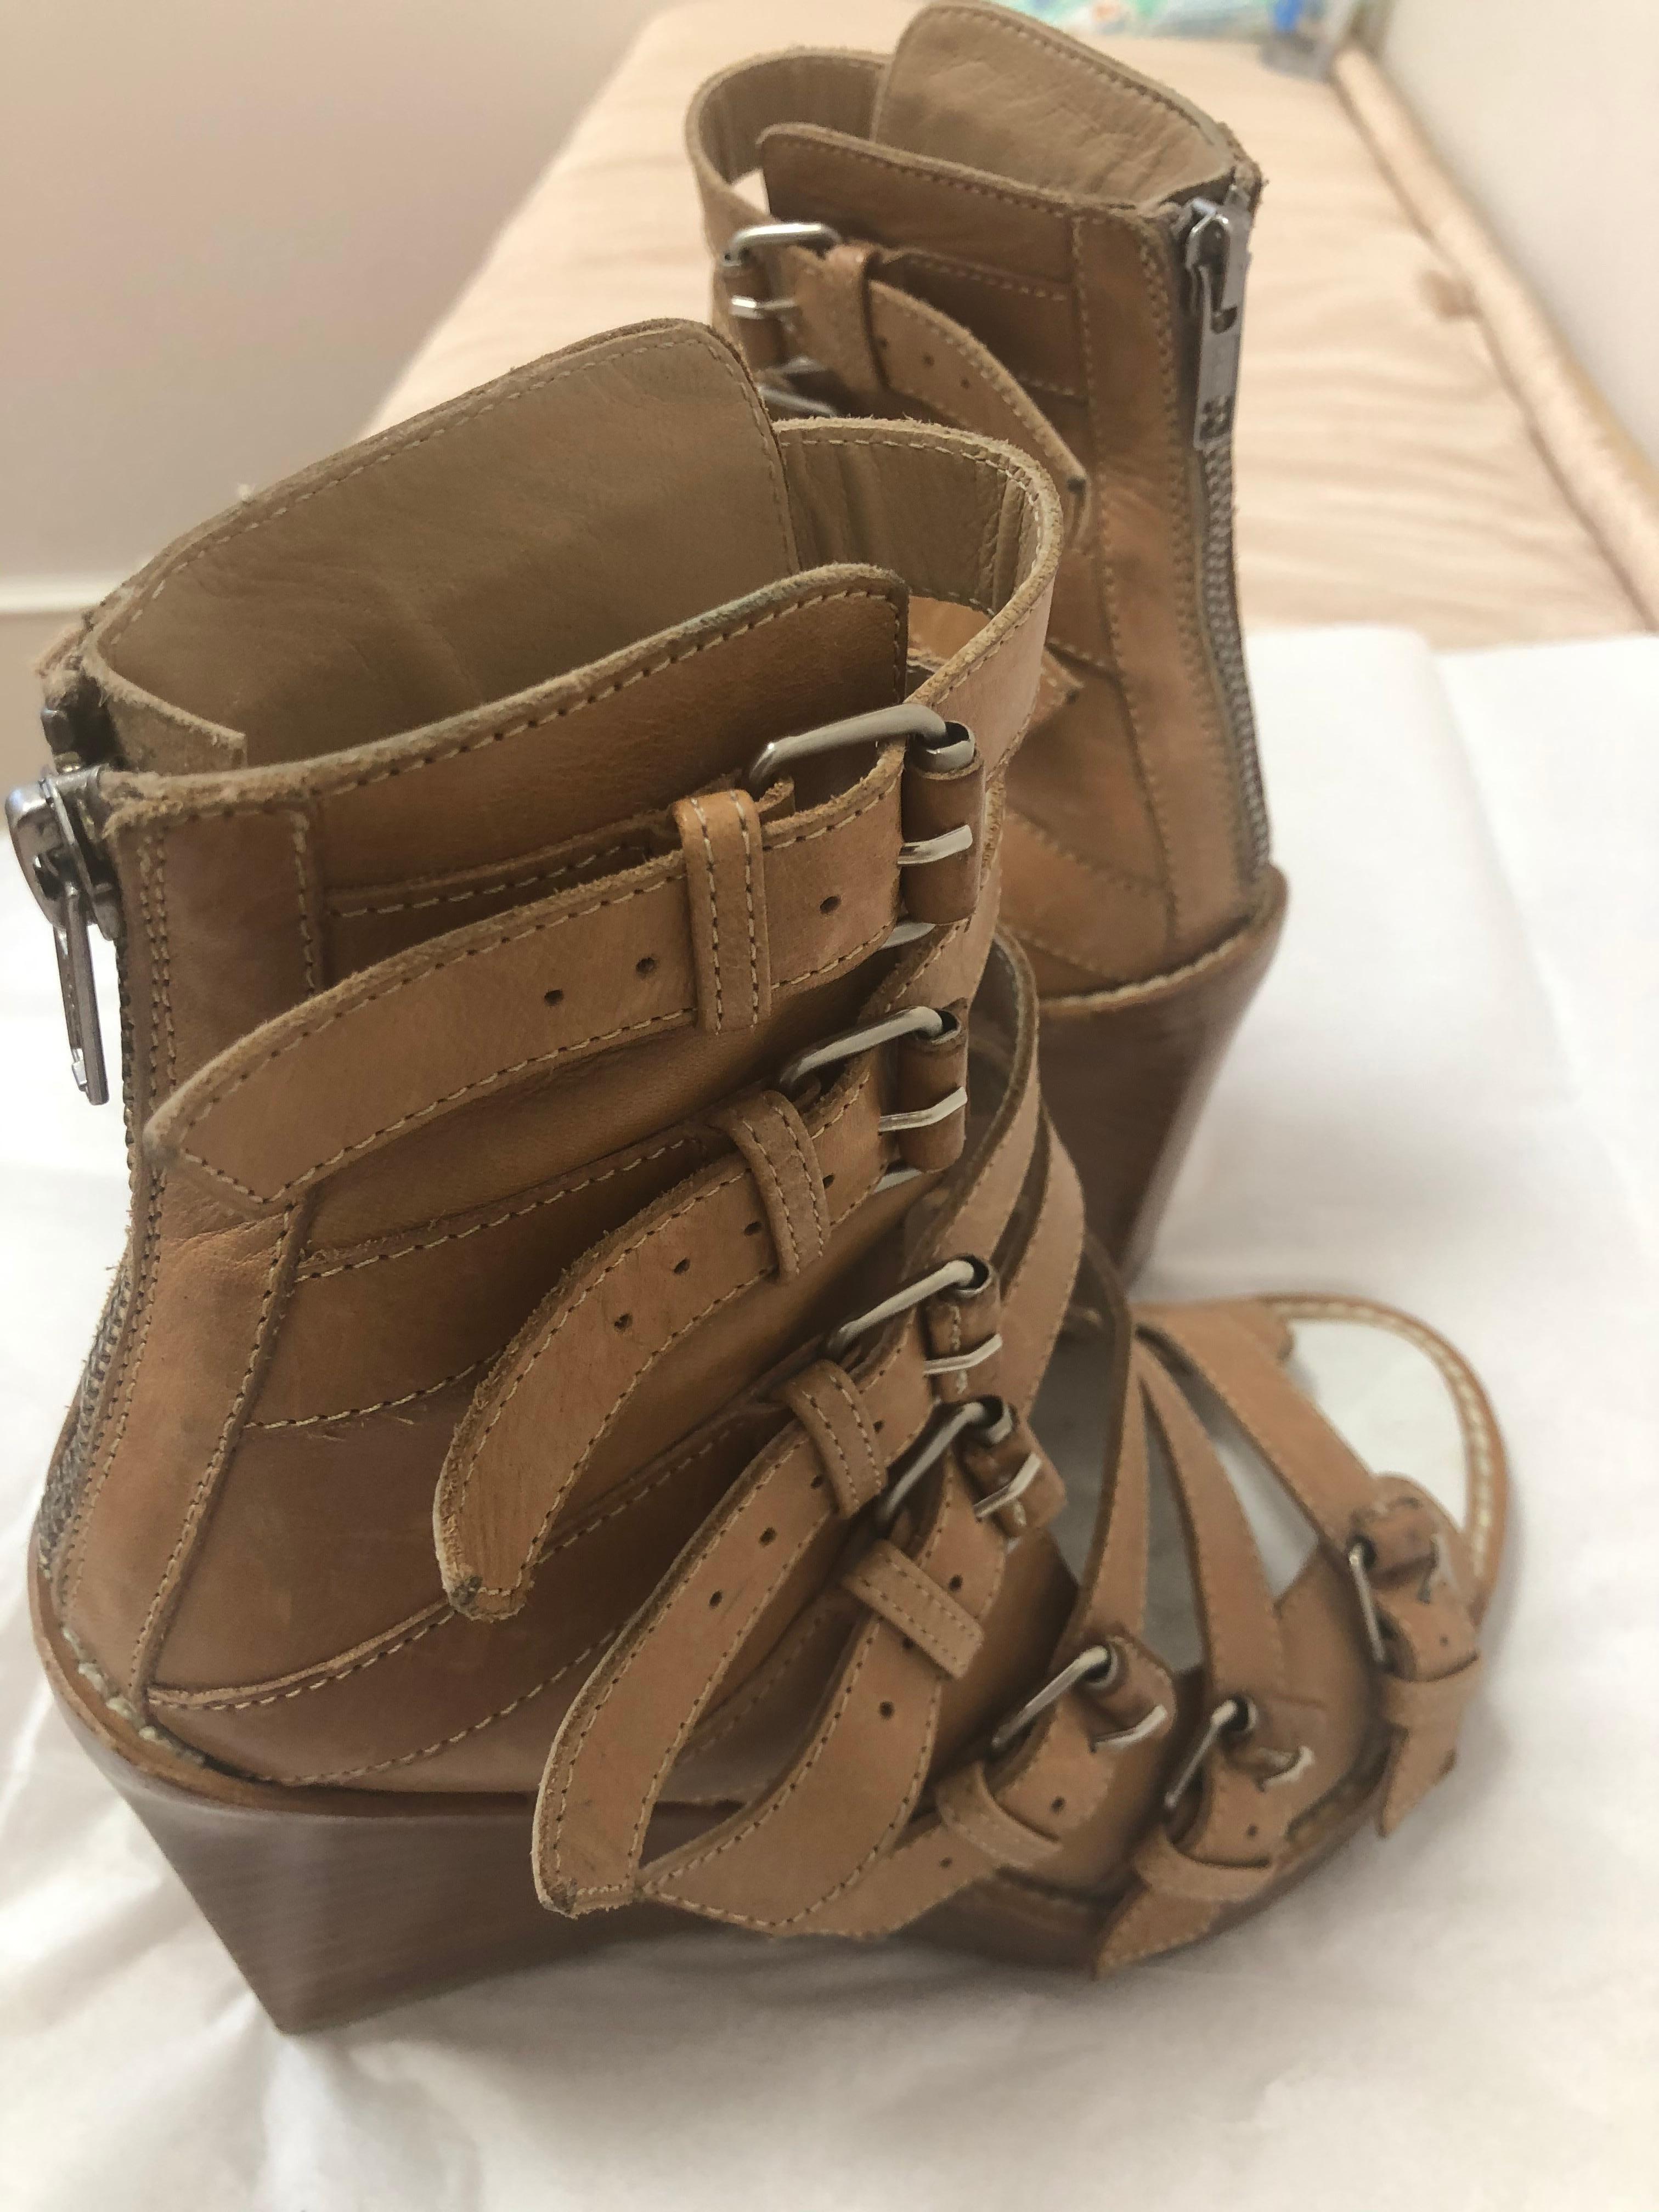 In great condition, these Ann Demeulemeester tan leather open toe gladiator wedges are so fashionable. They come up to your ankle, and although they have adjustable straps for easy wear, there is a zip at the centre back. No need to adjust the